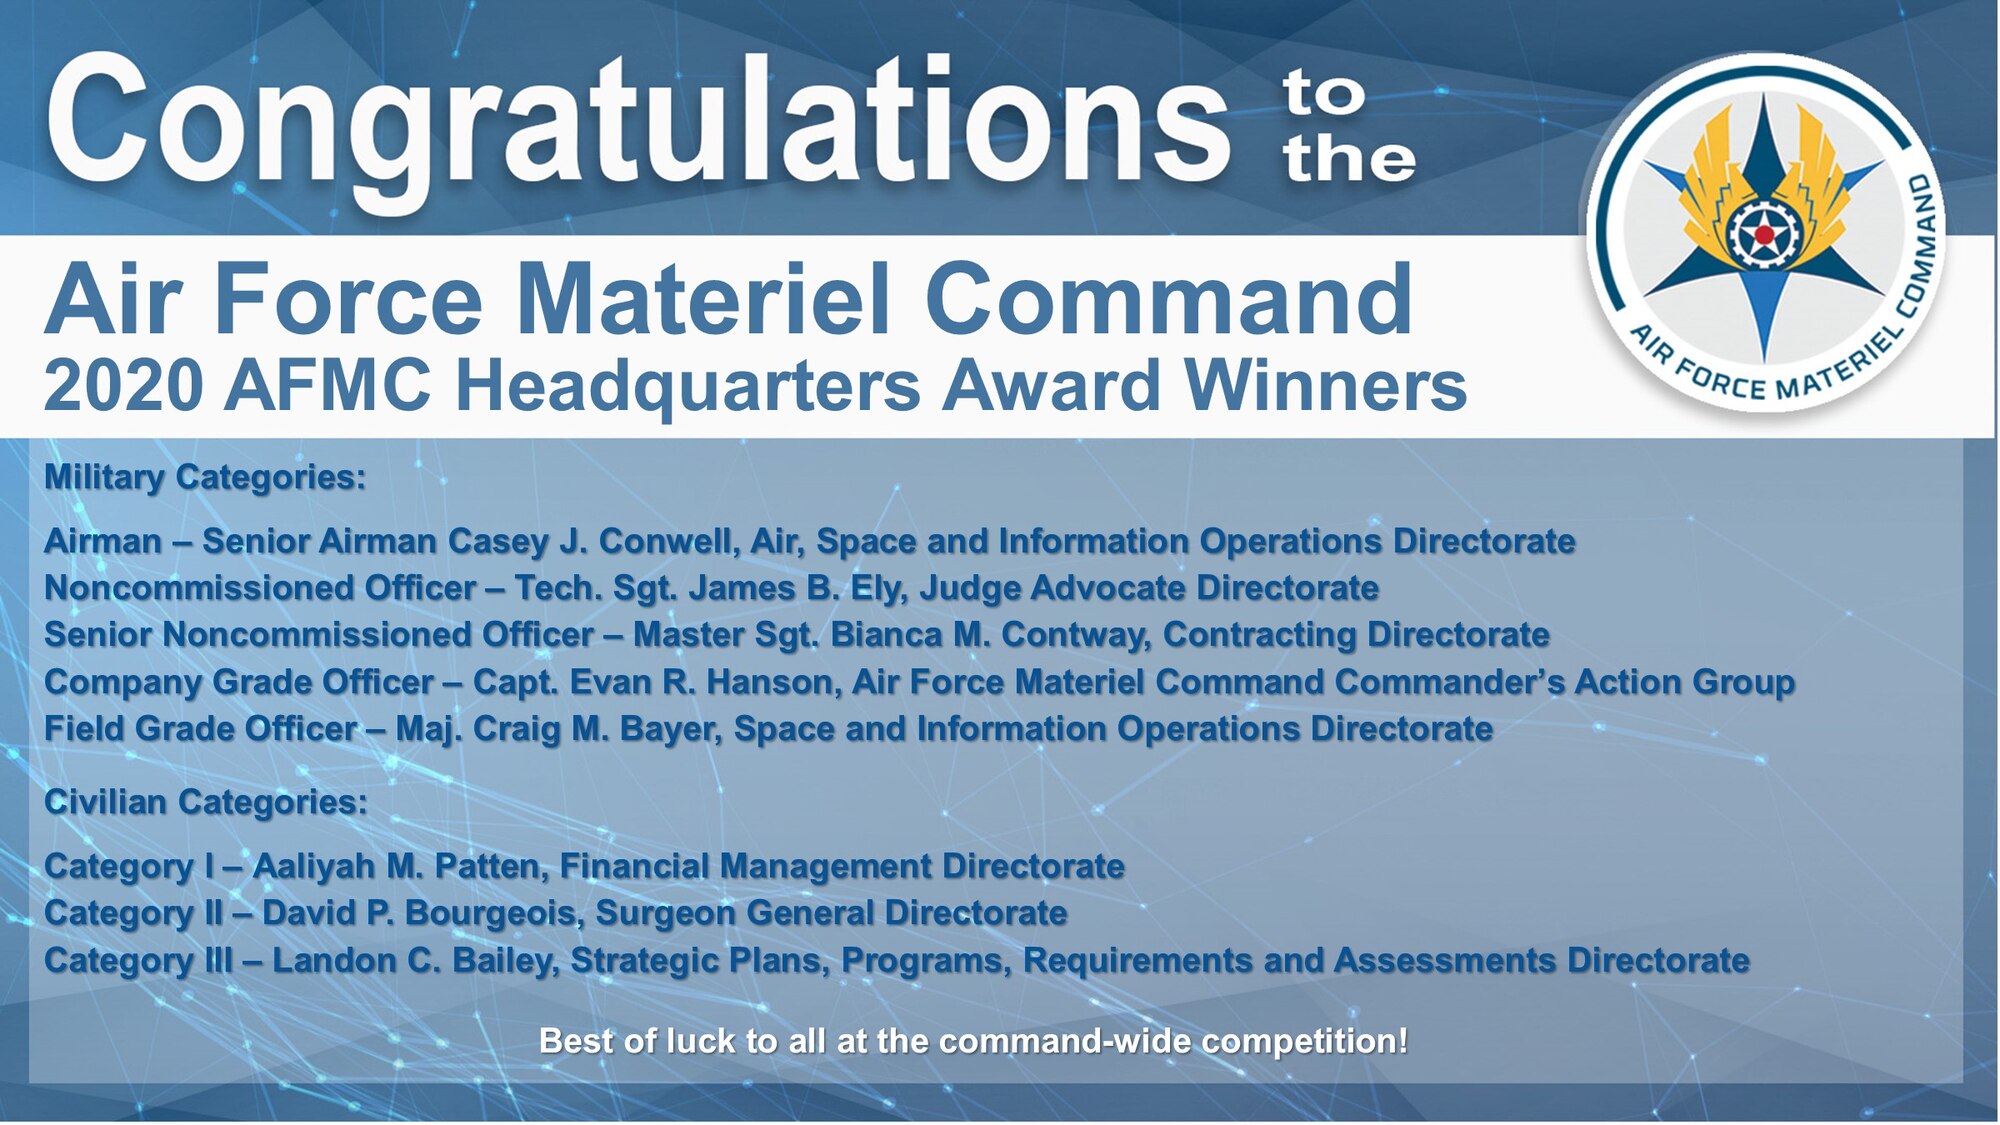 Congratulations to the AFMC 2020 Headquarters Award Winners